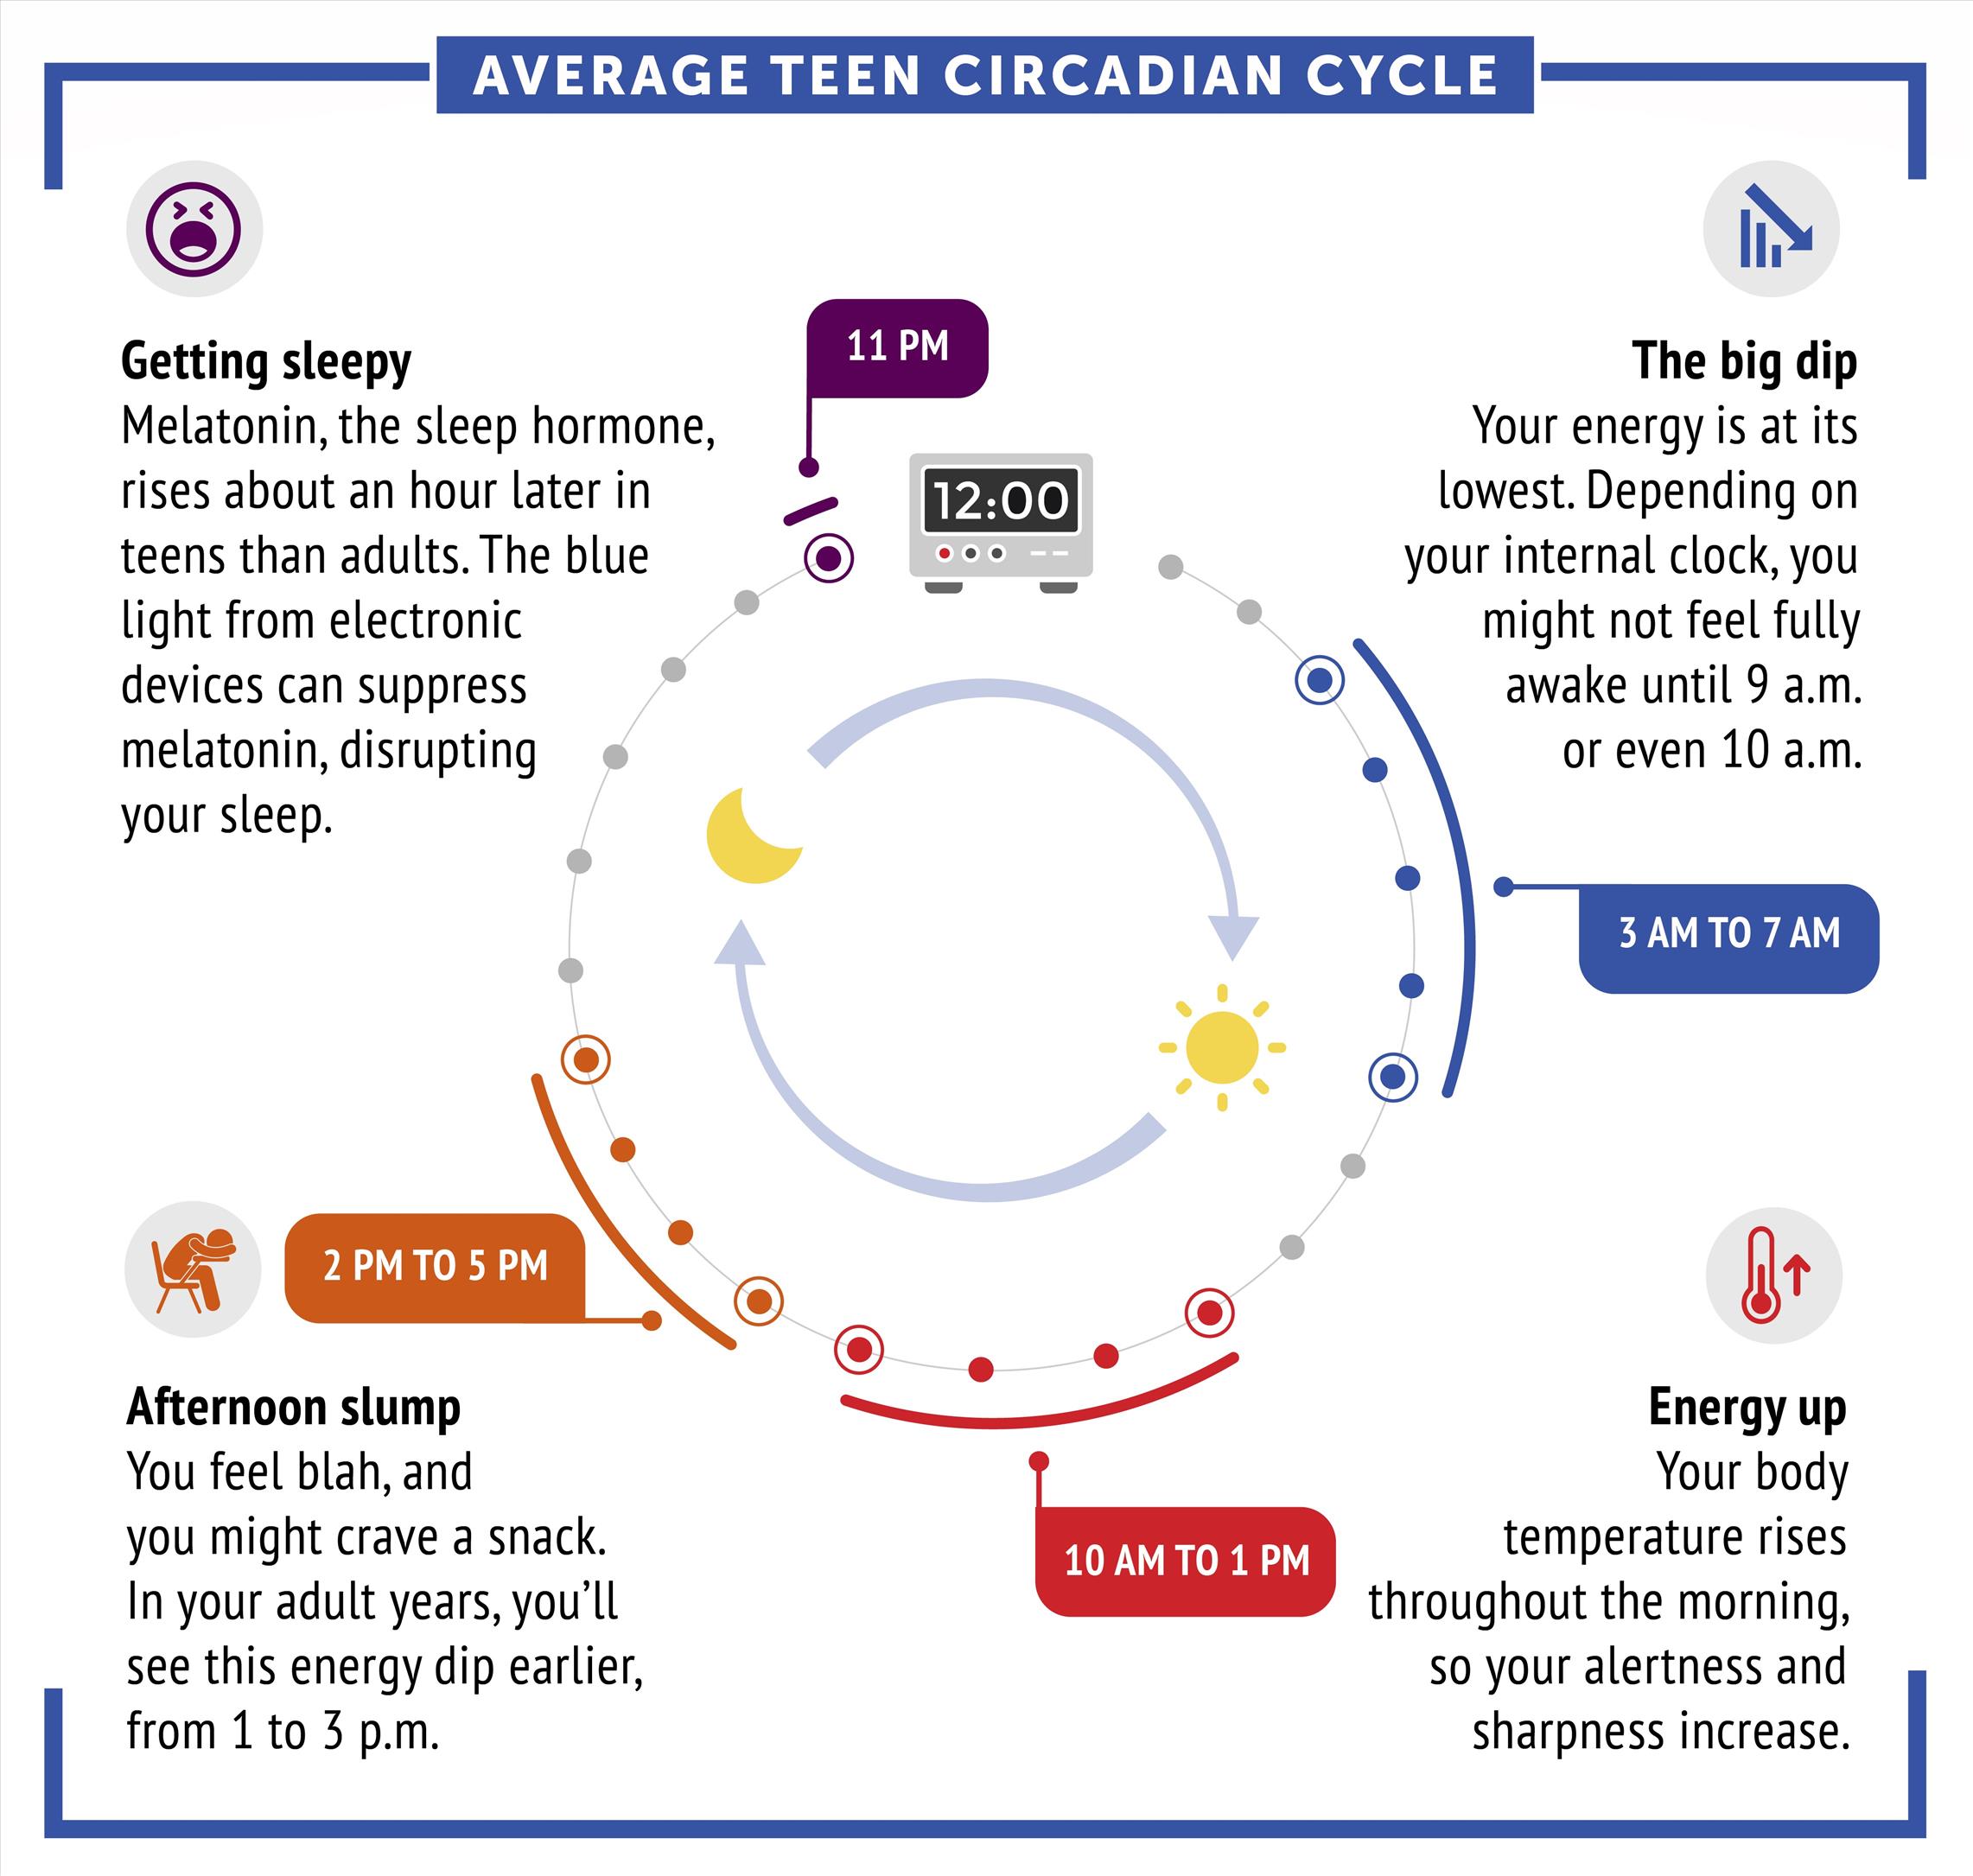 Average teen circadian cycle: A circle representing 24 hours. The section from 10 a.m. to 1 p.m. is labeled 'Energy up.' The section from 2 to 5 p.m. is labeled 'Afternoon slump.' The section at 11 p.m. is labeled “Getting sleepy.” The section from 3 to 7 a.m. is labeled 'The big dip.'